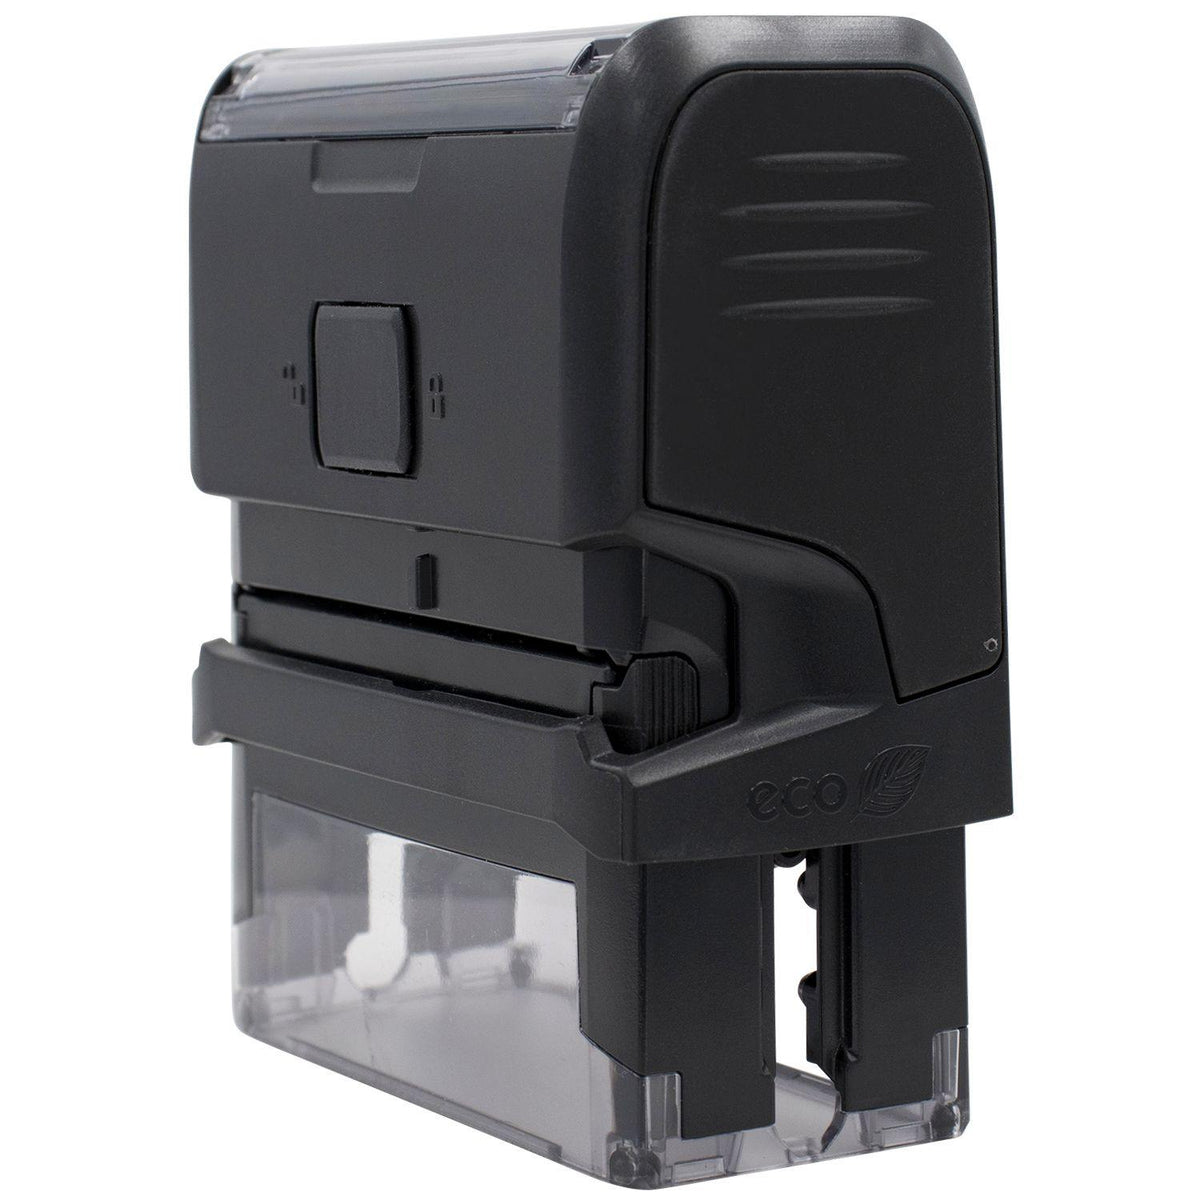 Self-Inking Global Express Guaranteed Stamp - Engineer Seal Stamps - Brand_Trodat, Impression Size_Small, Stamp Type_Self-Inking Stamp, Type of Use_Postal &amp; Mailing, Type of Use_Shipping &amp; Receiving